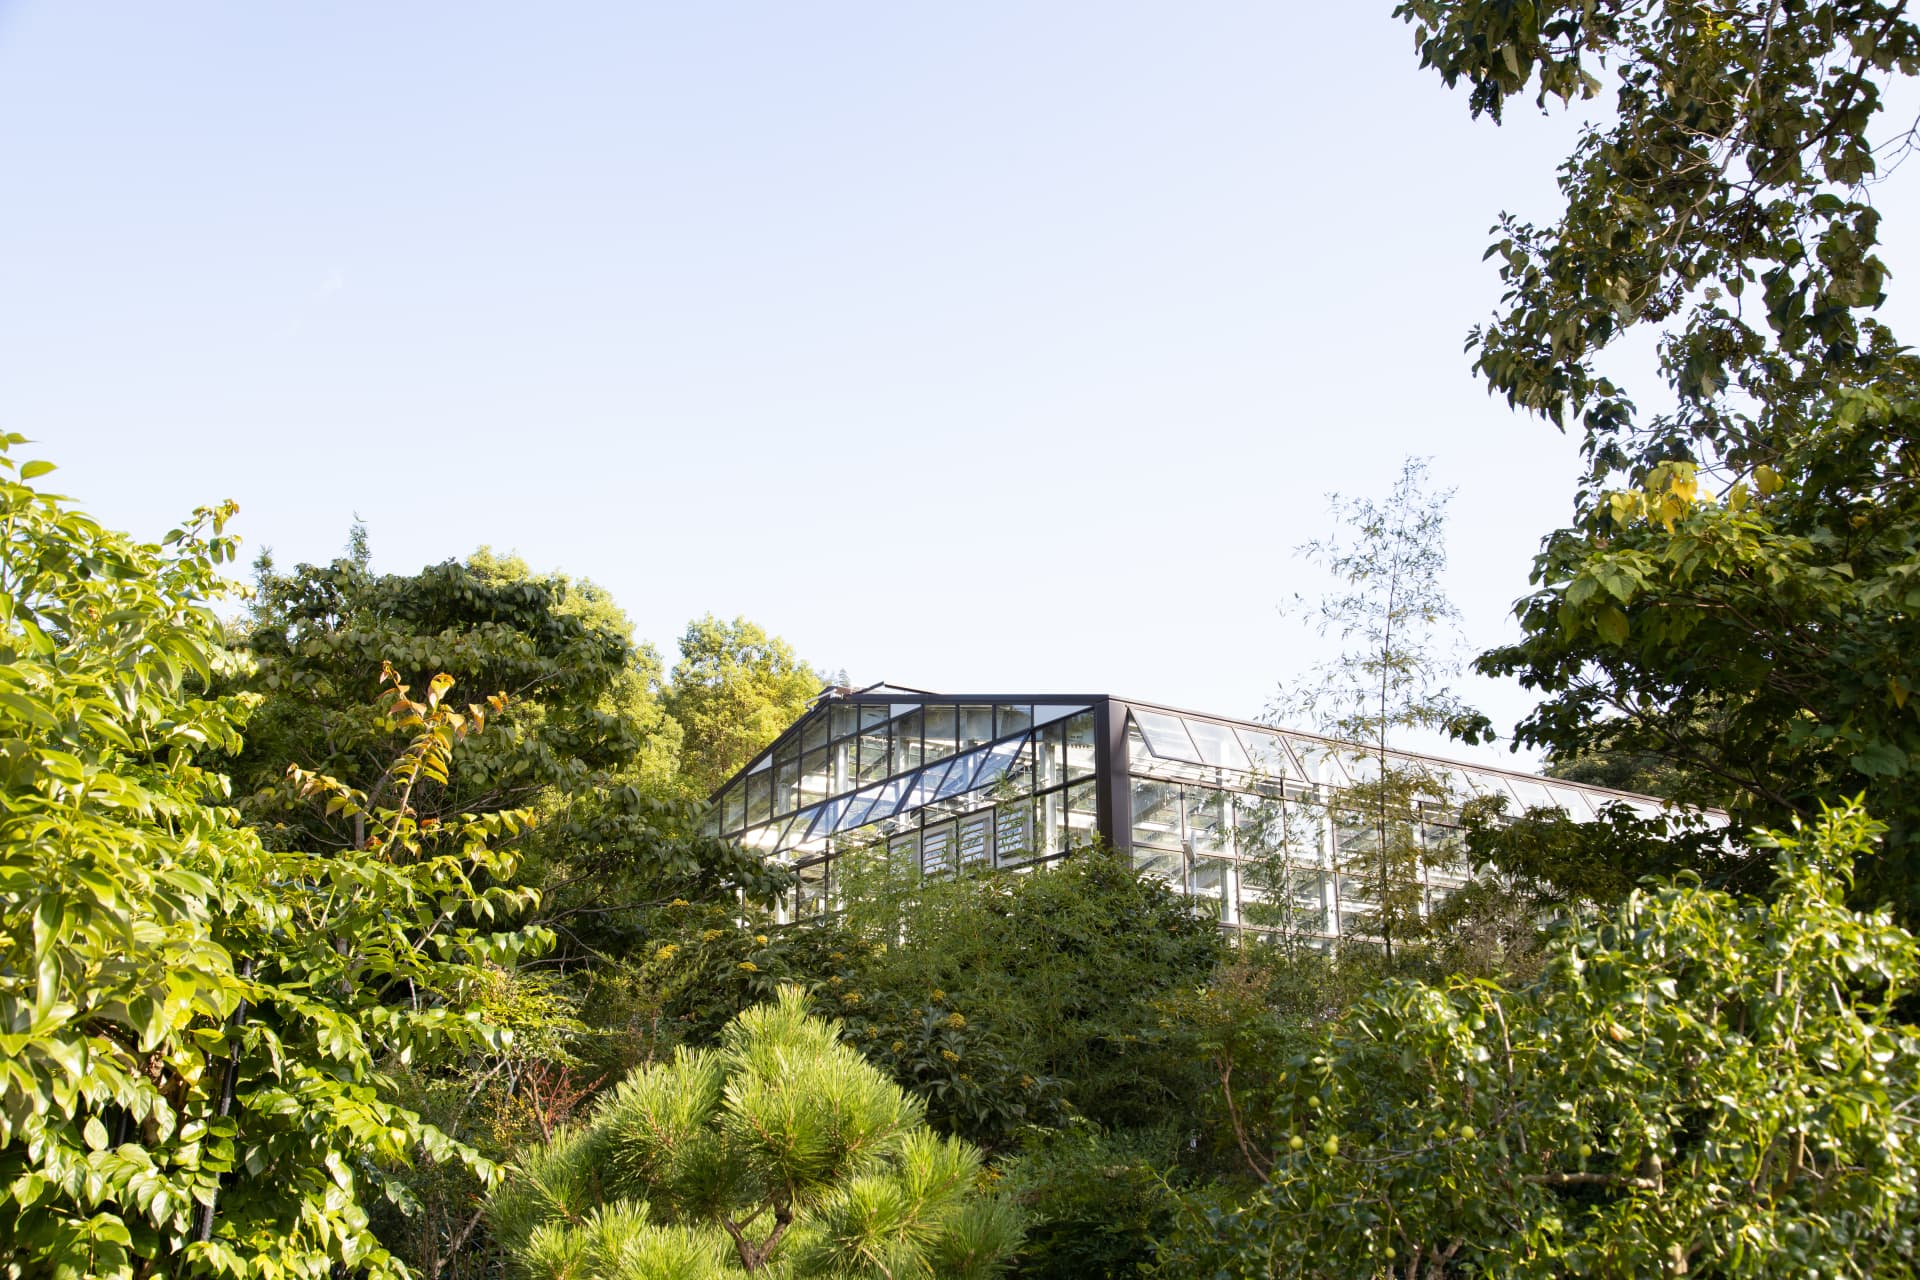 greenhouse surrounded by plants